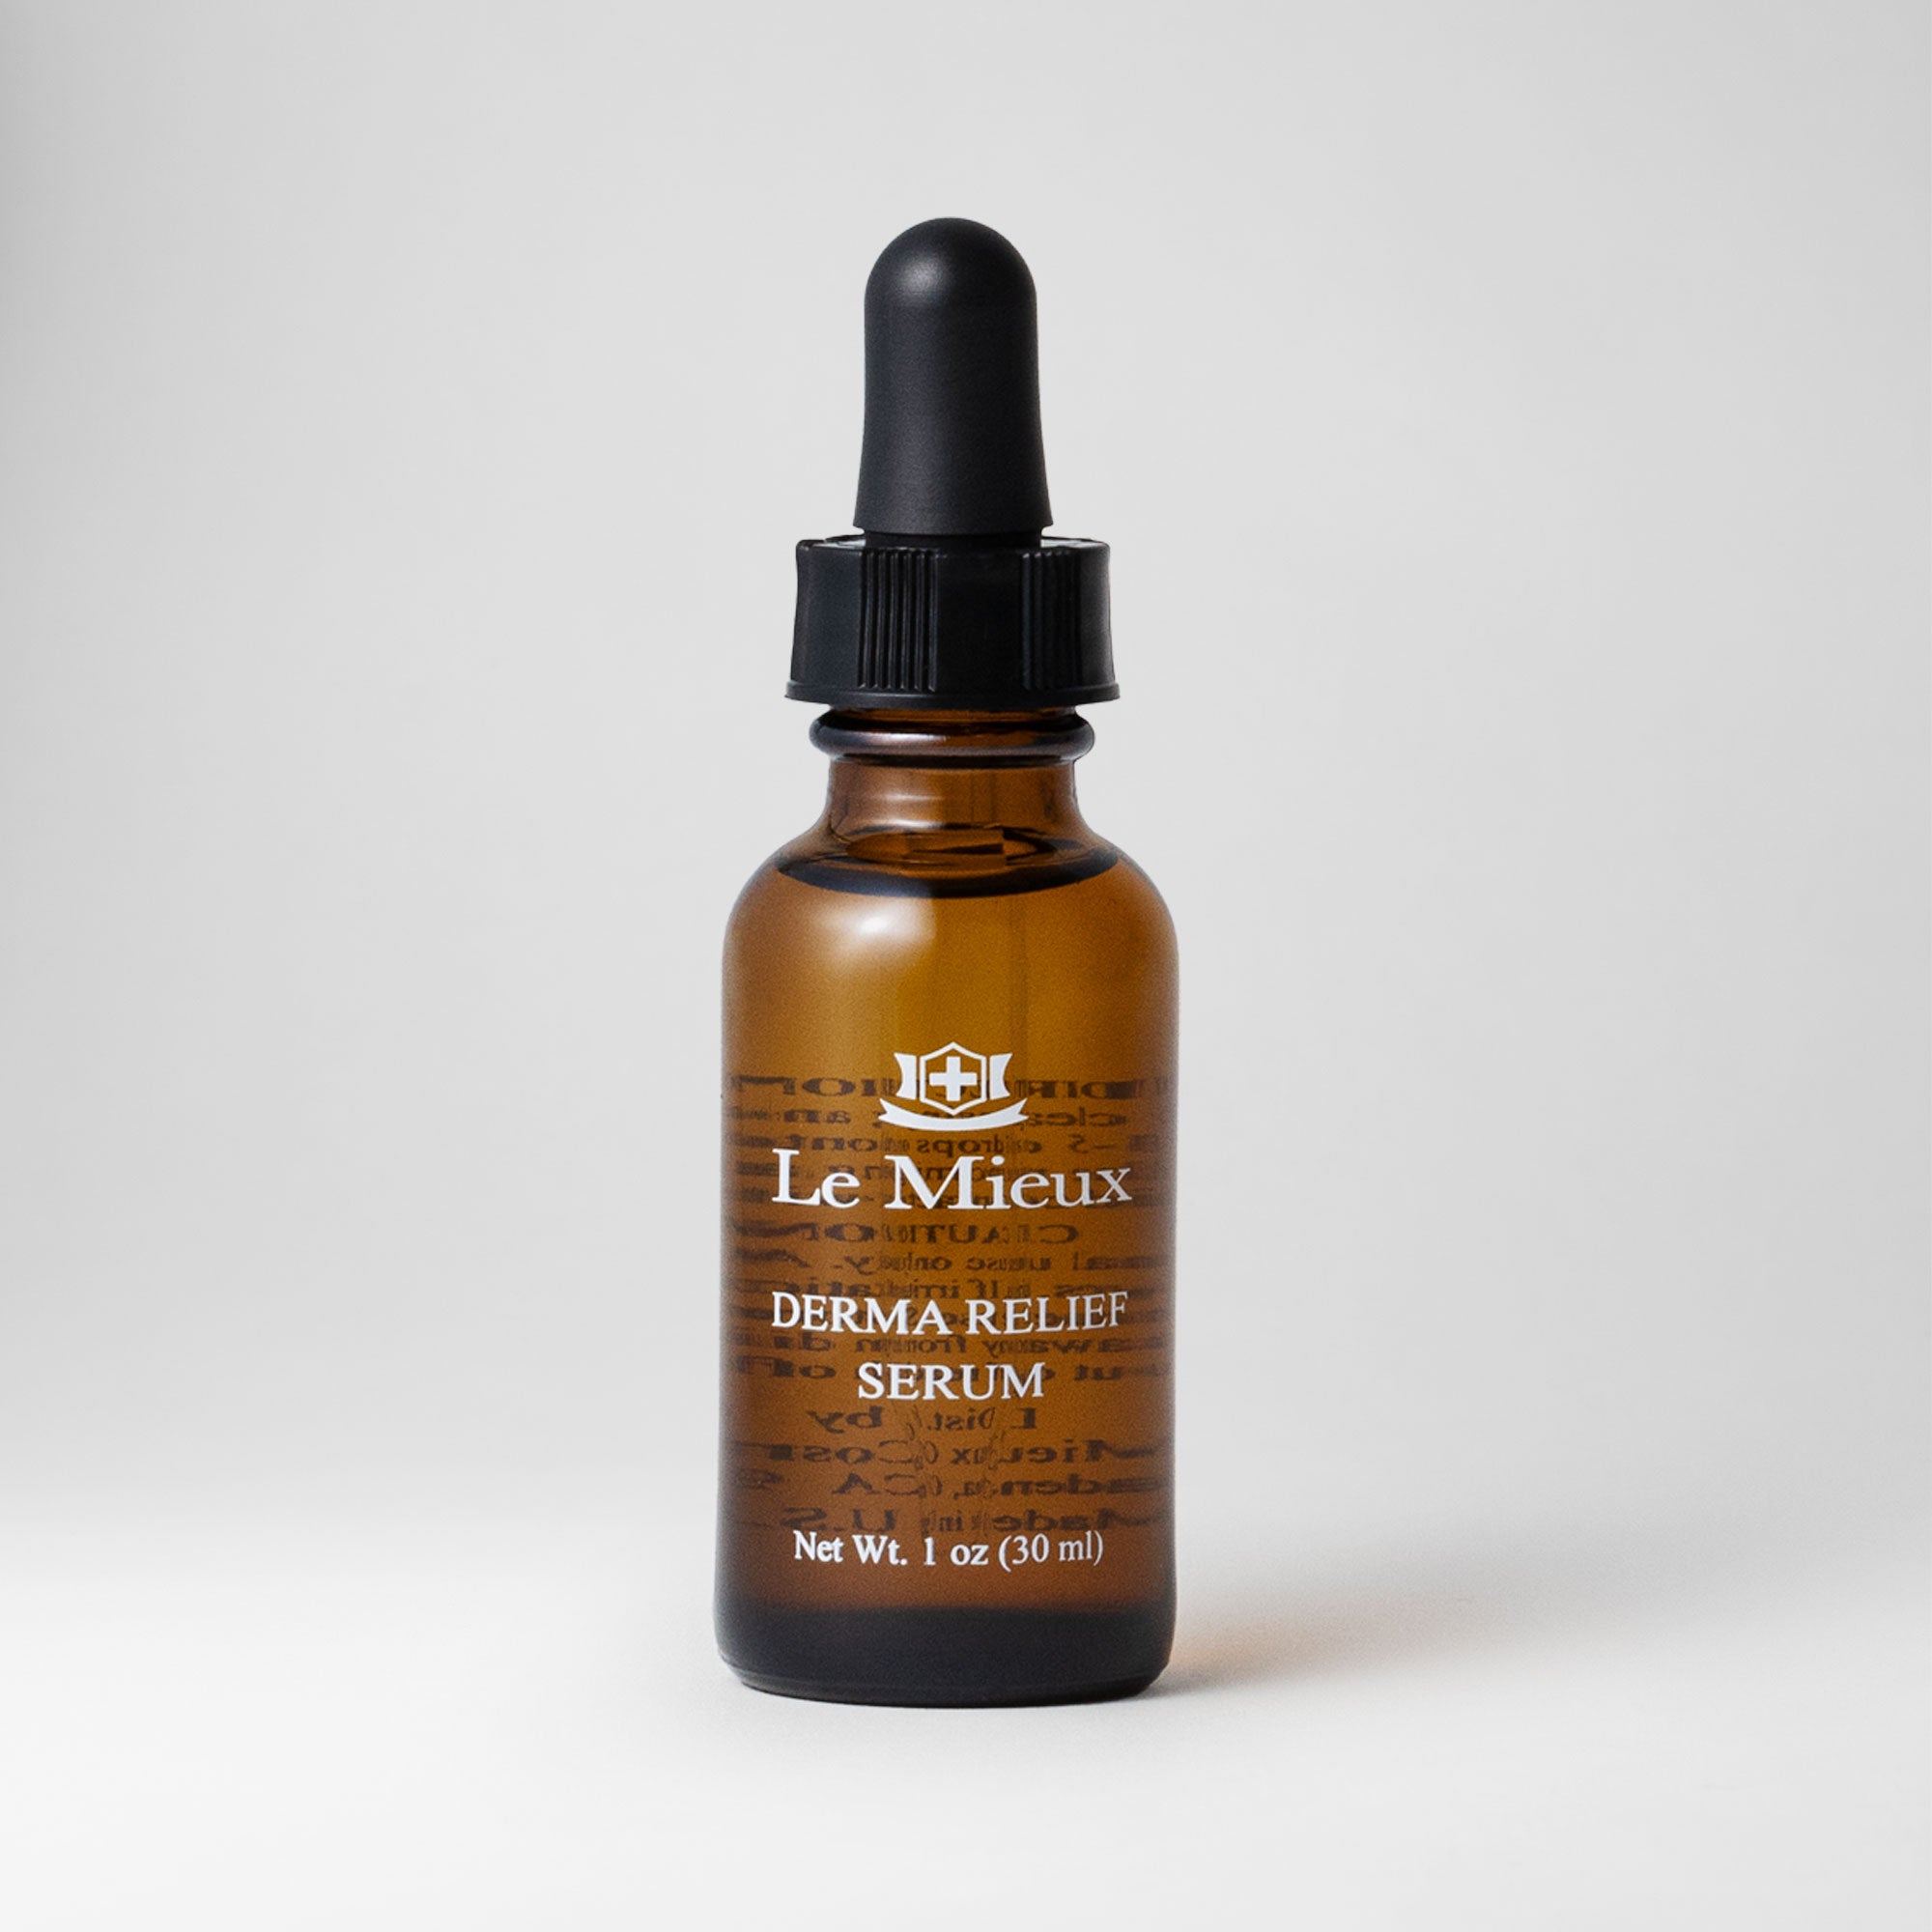  DERMA RELIEF SERUM from Le Mieux Skincare - featured